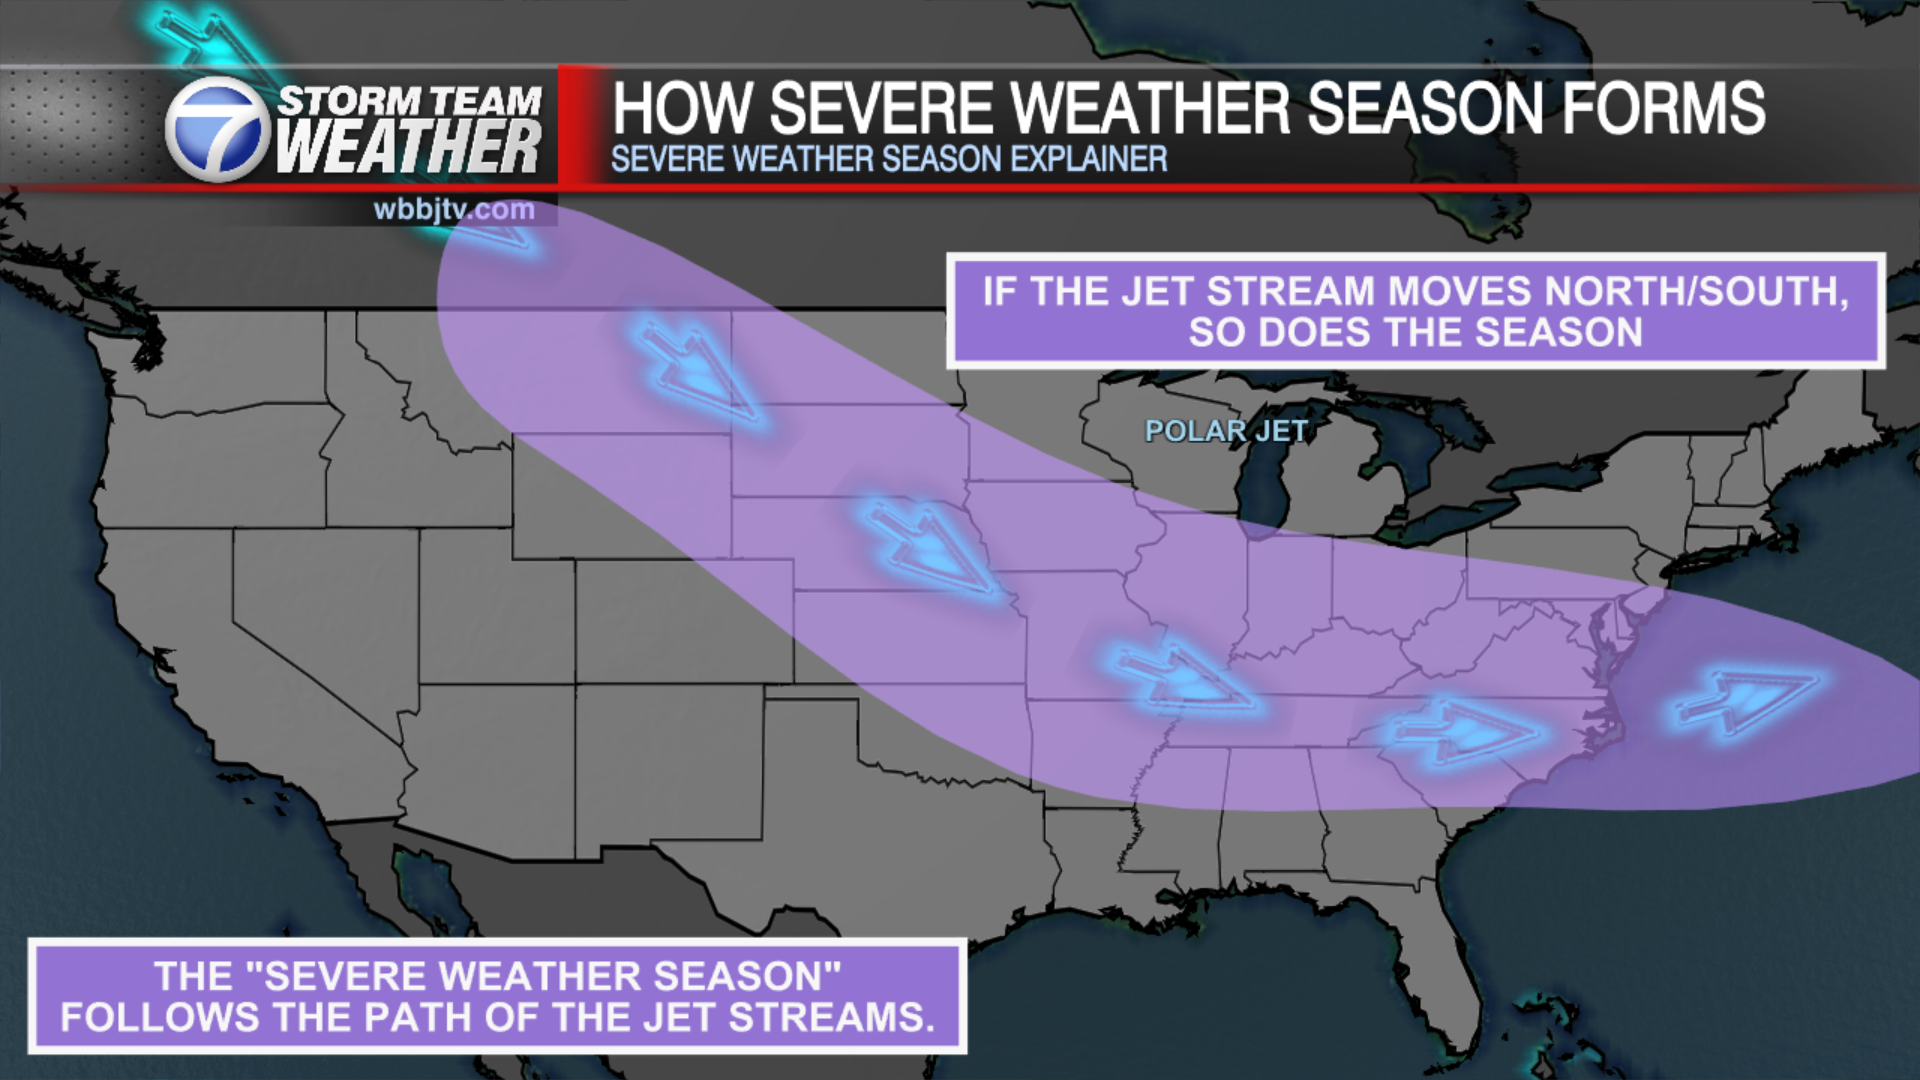 How Does the Jet Stream Correlate with Severe Weather Season